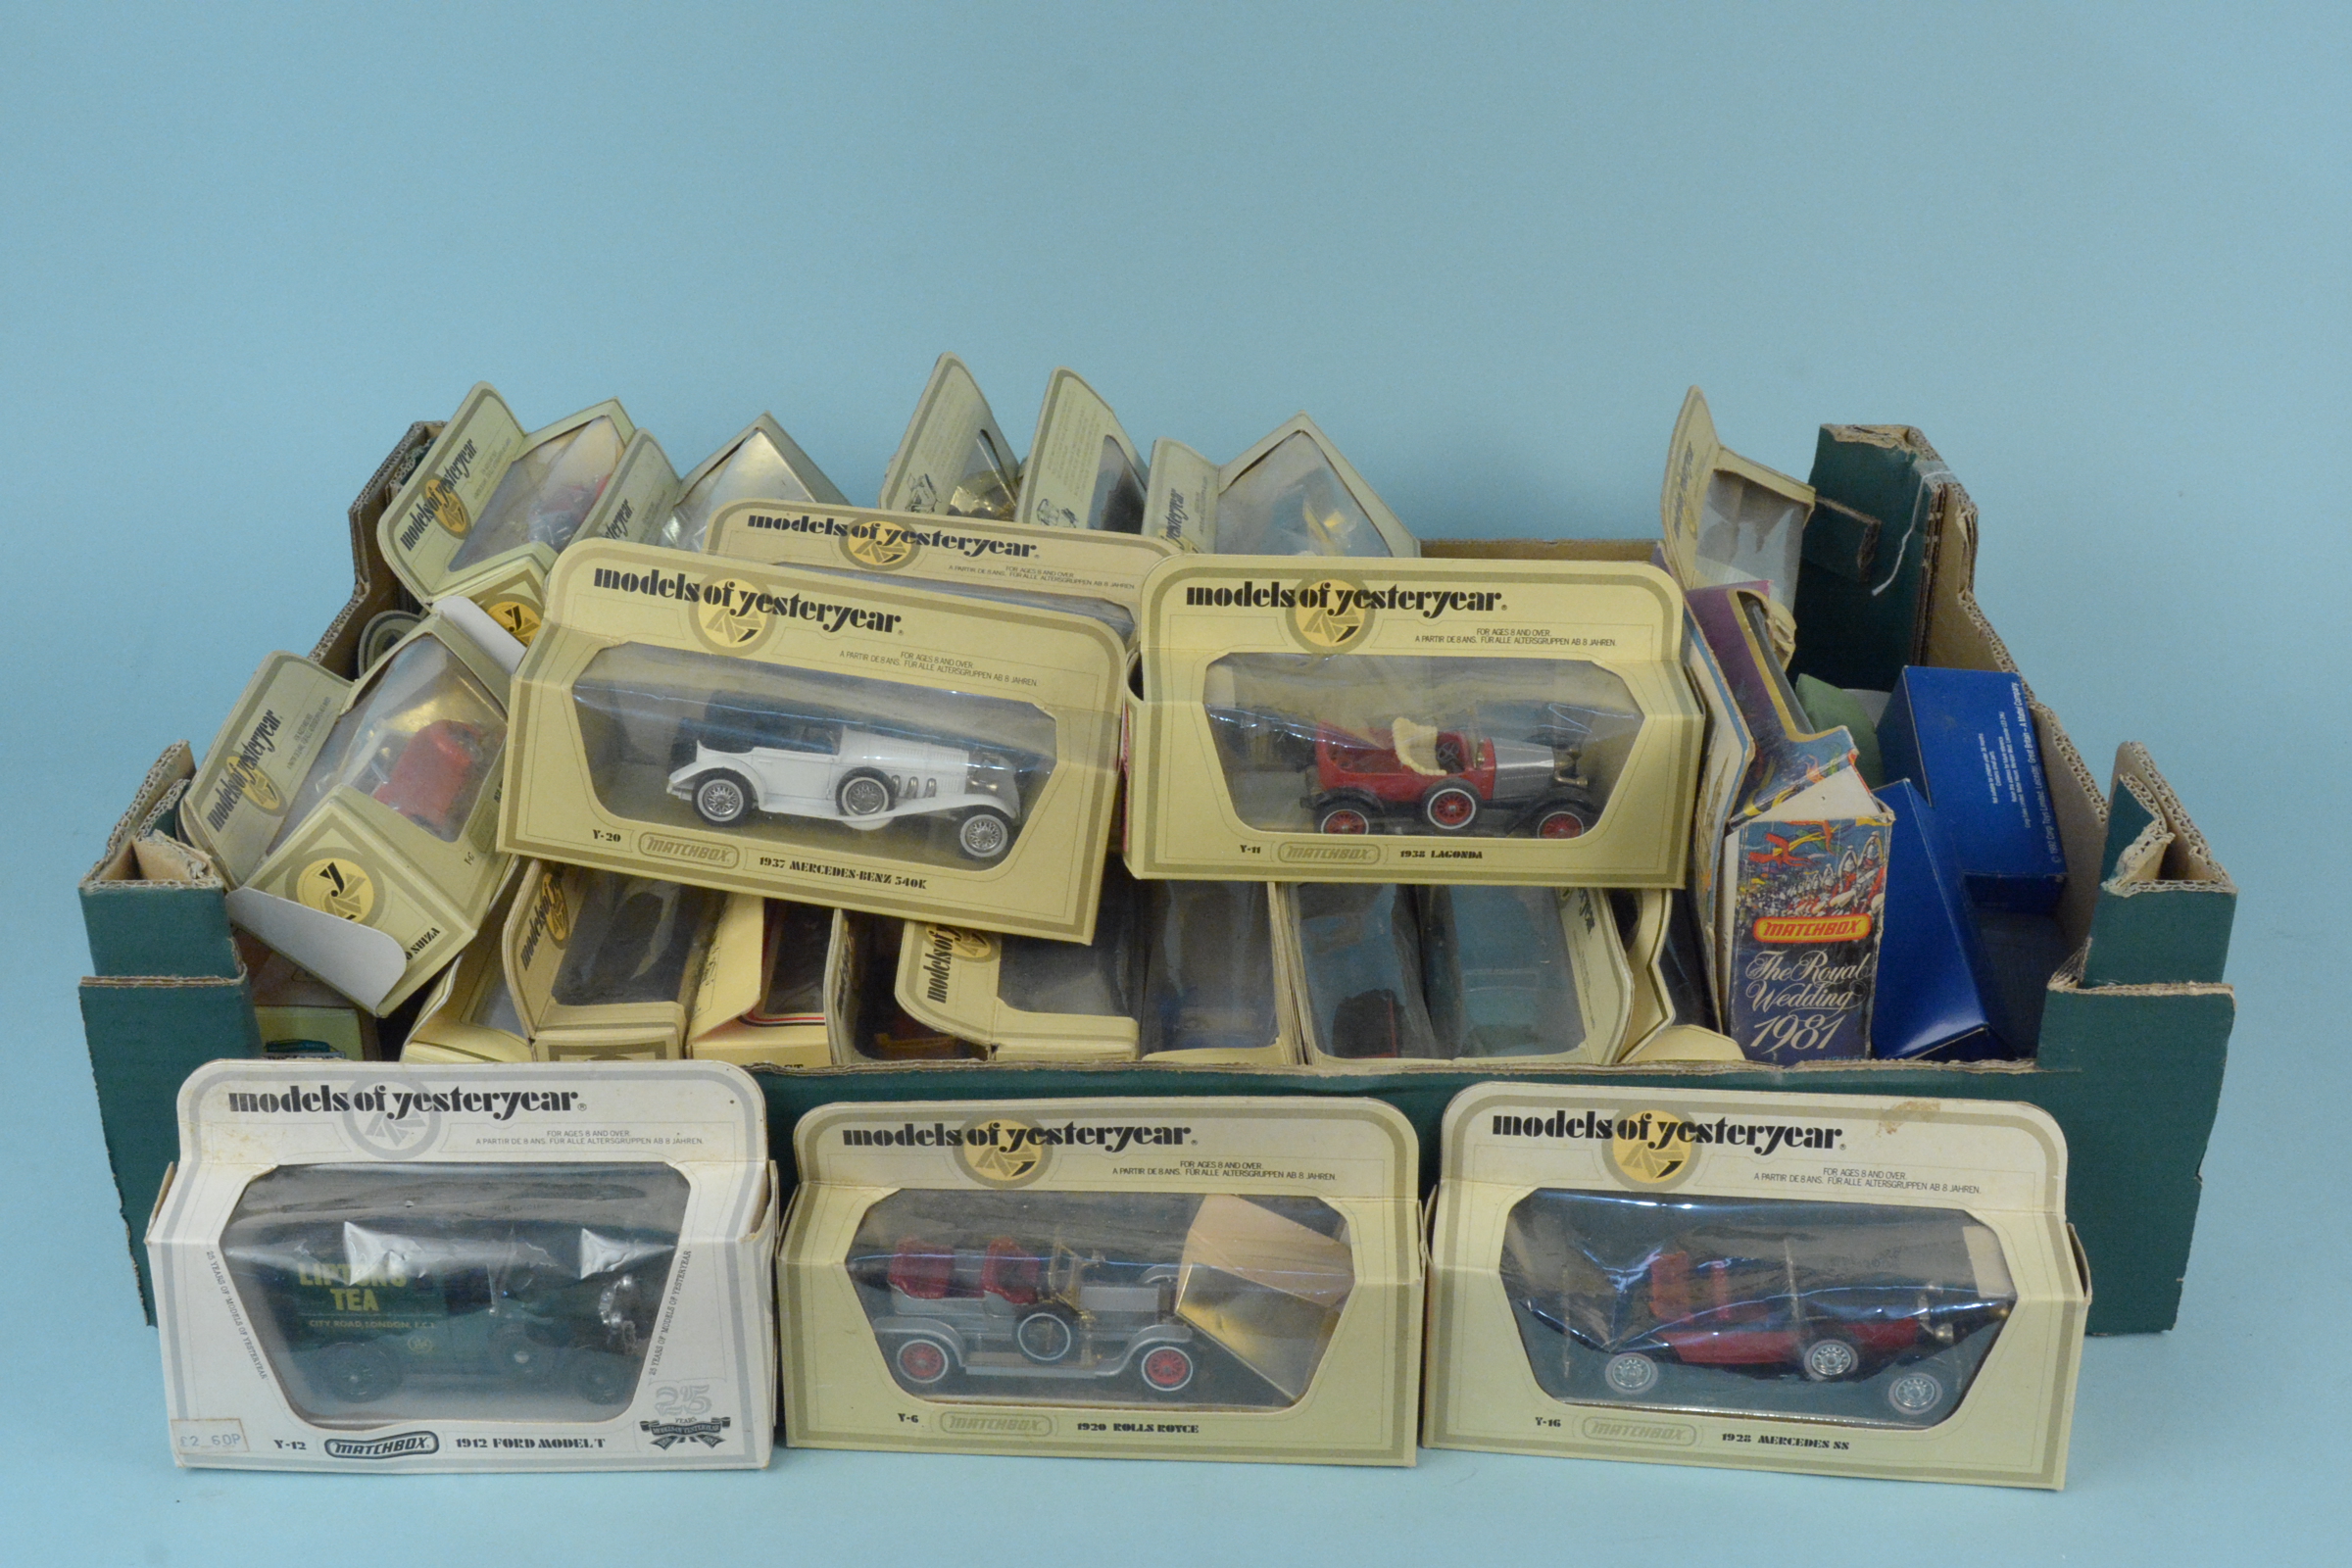 A box of Matchbox Models of Yesteryear including 1981 Royal Wedding bus